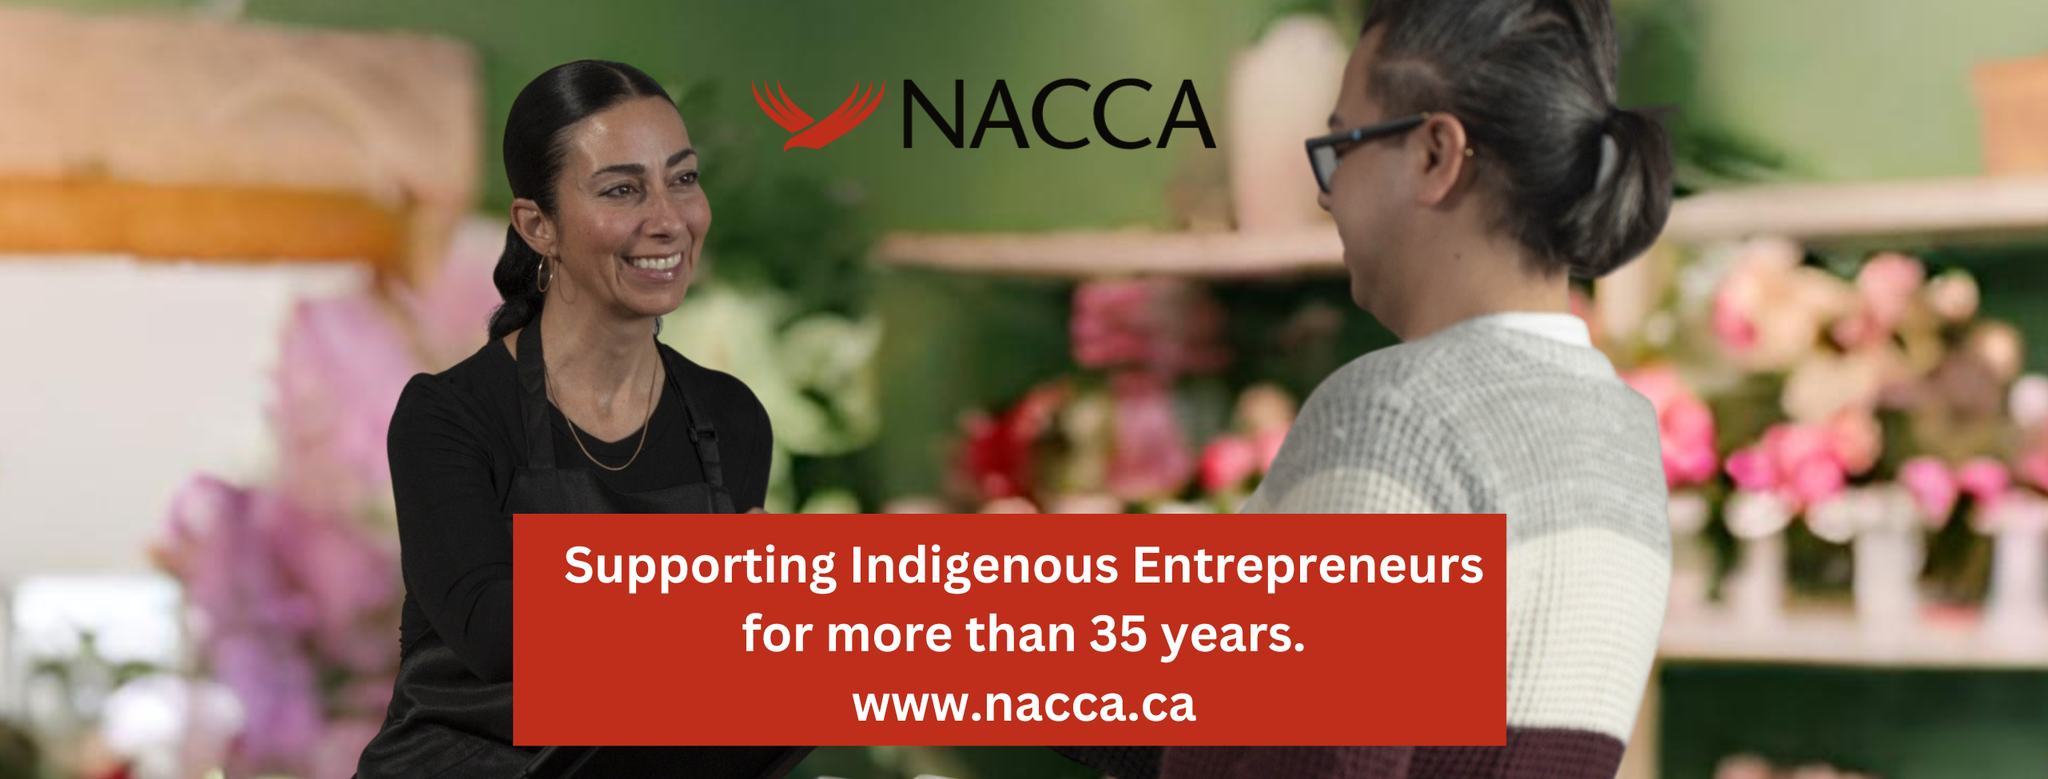 The National Aboriginal Capital Corporations Association (NACCA) is the umbrella organization for a network of 50+ Indigenous Financial Institutions (IFIs) across Canada.